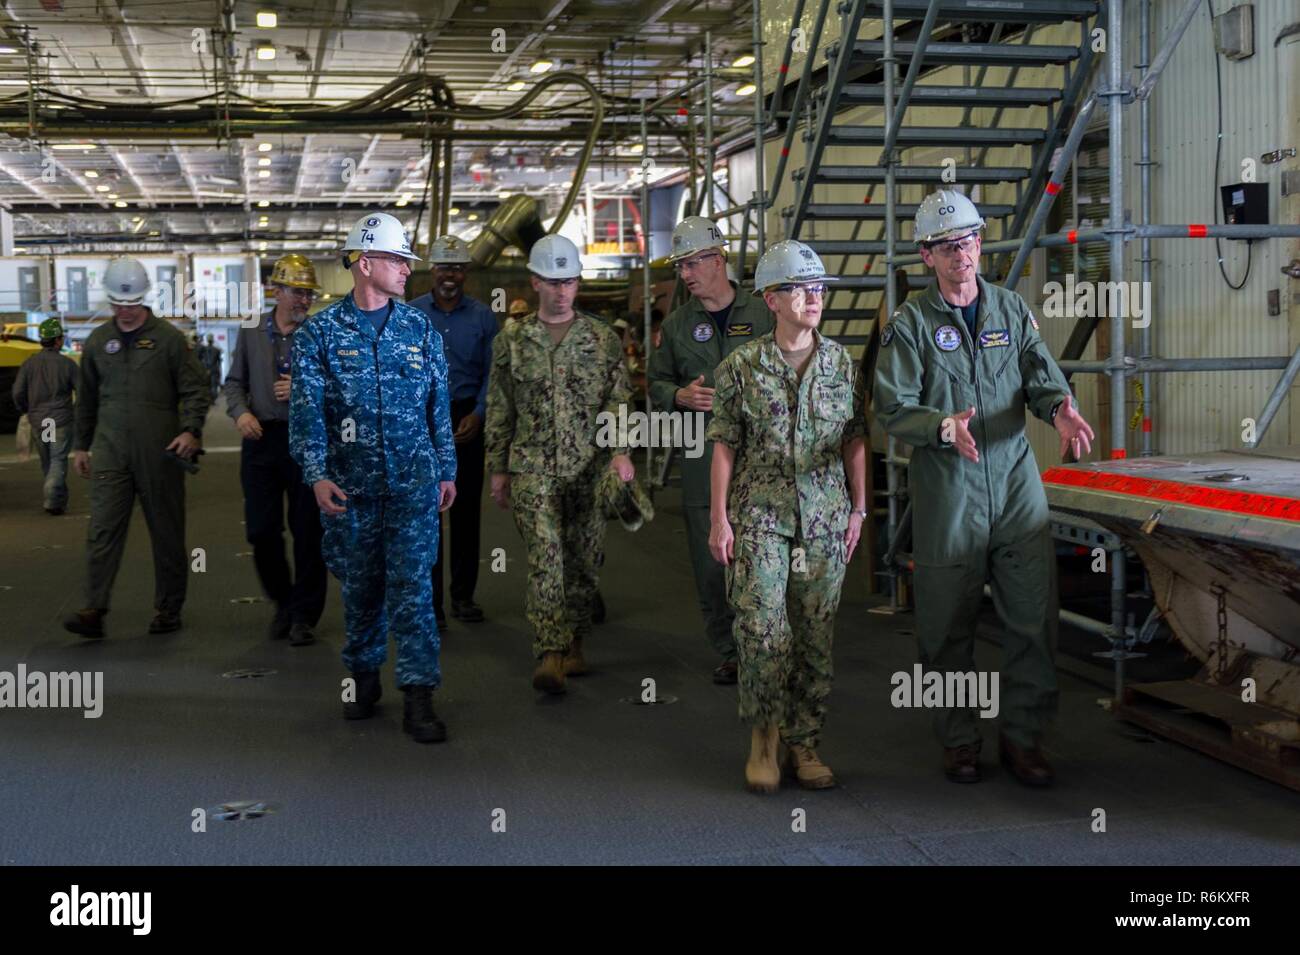 BREMERTON, Washington (May 19, 2017) Vice Adm. Nora Tyson, commander, U.S. 3rd Fleet, tours USS John C. Stennis’ (CVN 74) hangar bay during a visit to speak with Sailors. Tyson is visiting the Pacific Northwest to speak with Sailors during various all hands calls around Naval Base Kitsap and to serve as grand marshal of the 69th annual Bremerton Armed Forces Day Parade. John C. Stennis is conducting a planned incremental availability (PIA) at Puget Sound Naval Shipyard and Intermediate Maintenance Facility, during which the ship is undergoing scheduled maintenance and upgrades. Stock Photo